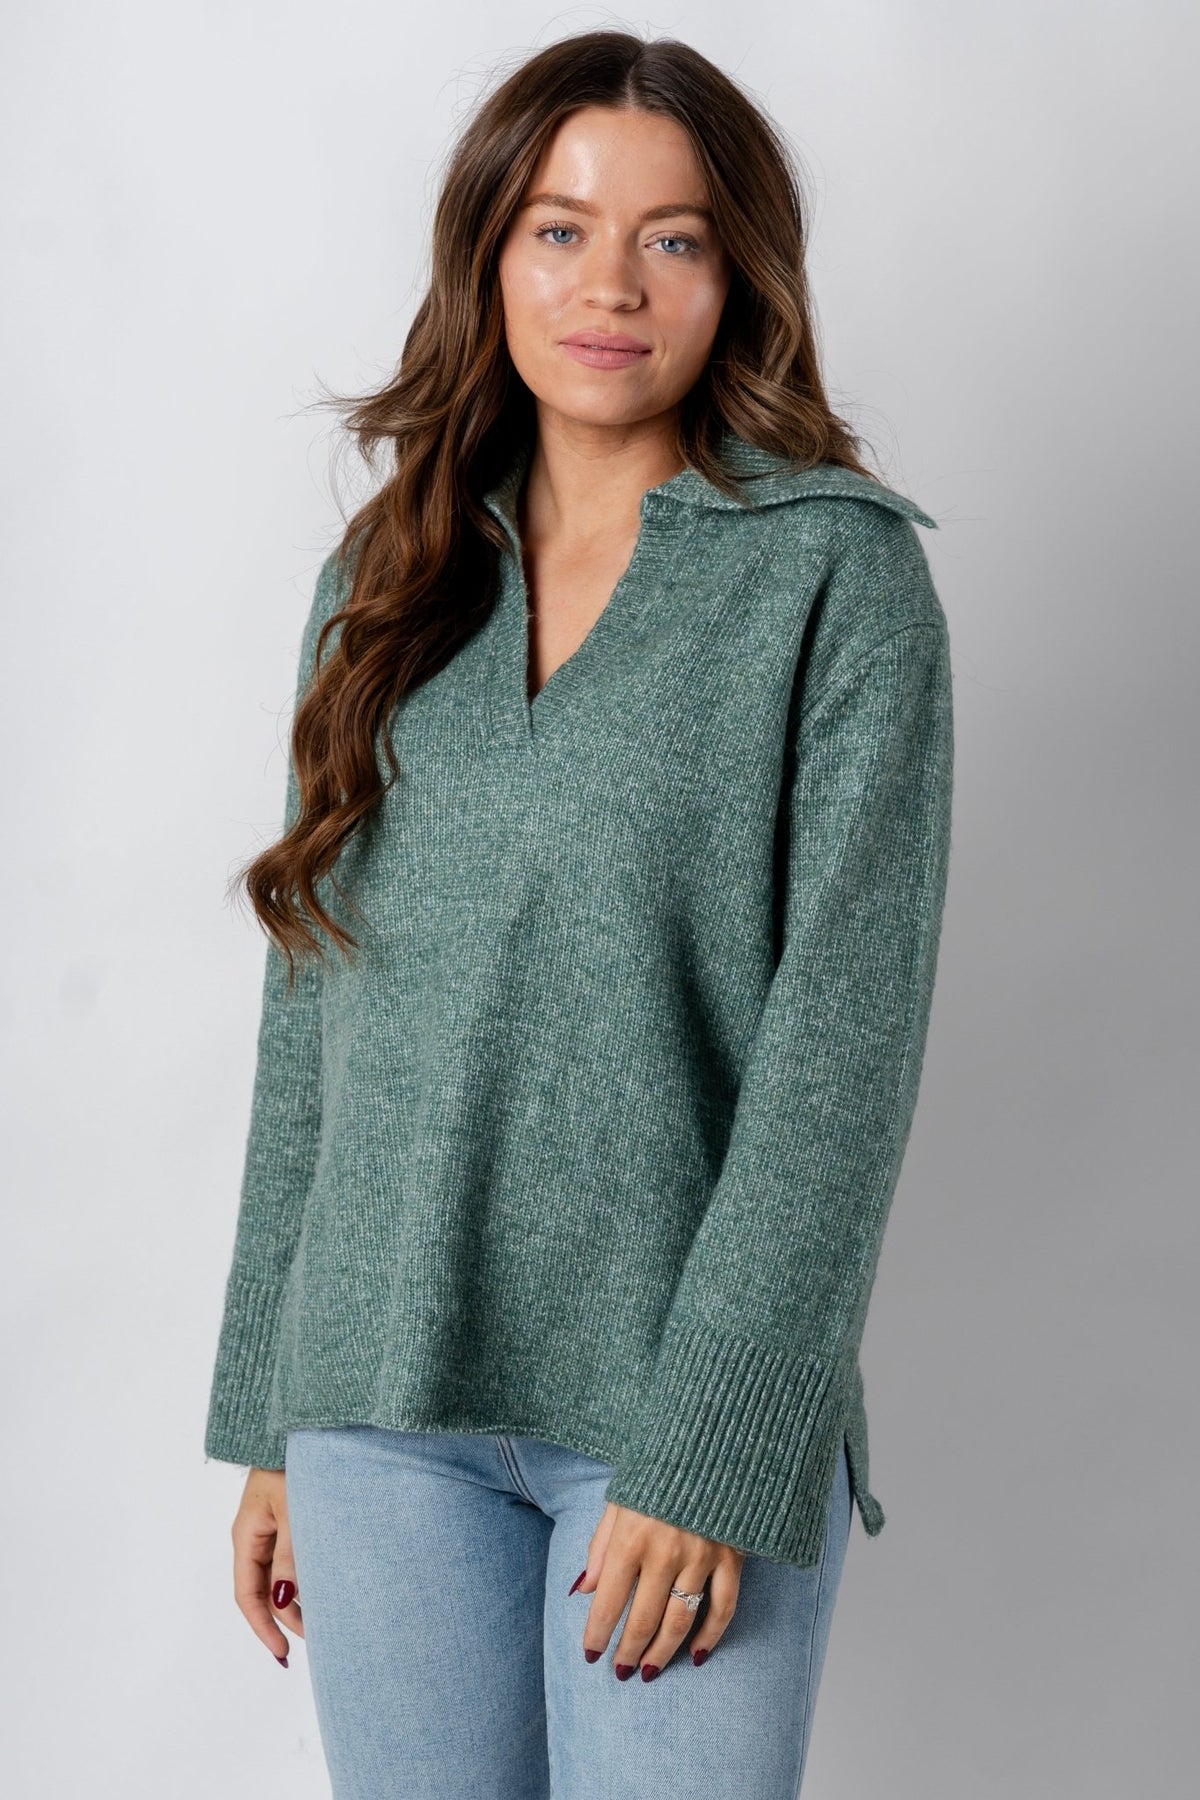 Z Supply Ember sweater everglade - Z Supply Sweaters - Z Supply Tops, Dresses, Tanks, Tees, Cardigans, Joggers and Loungewear at Lush Fashion Lounge